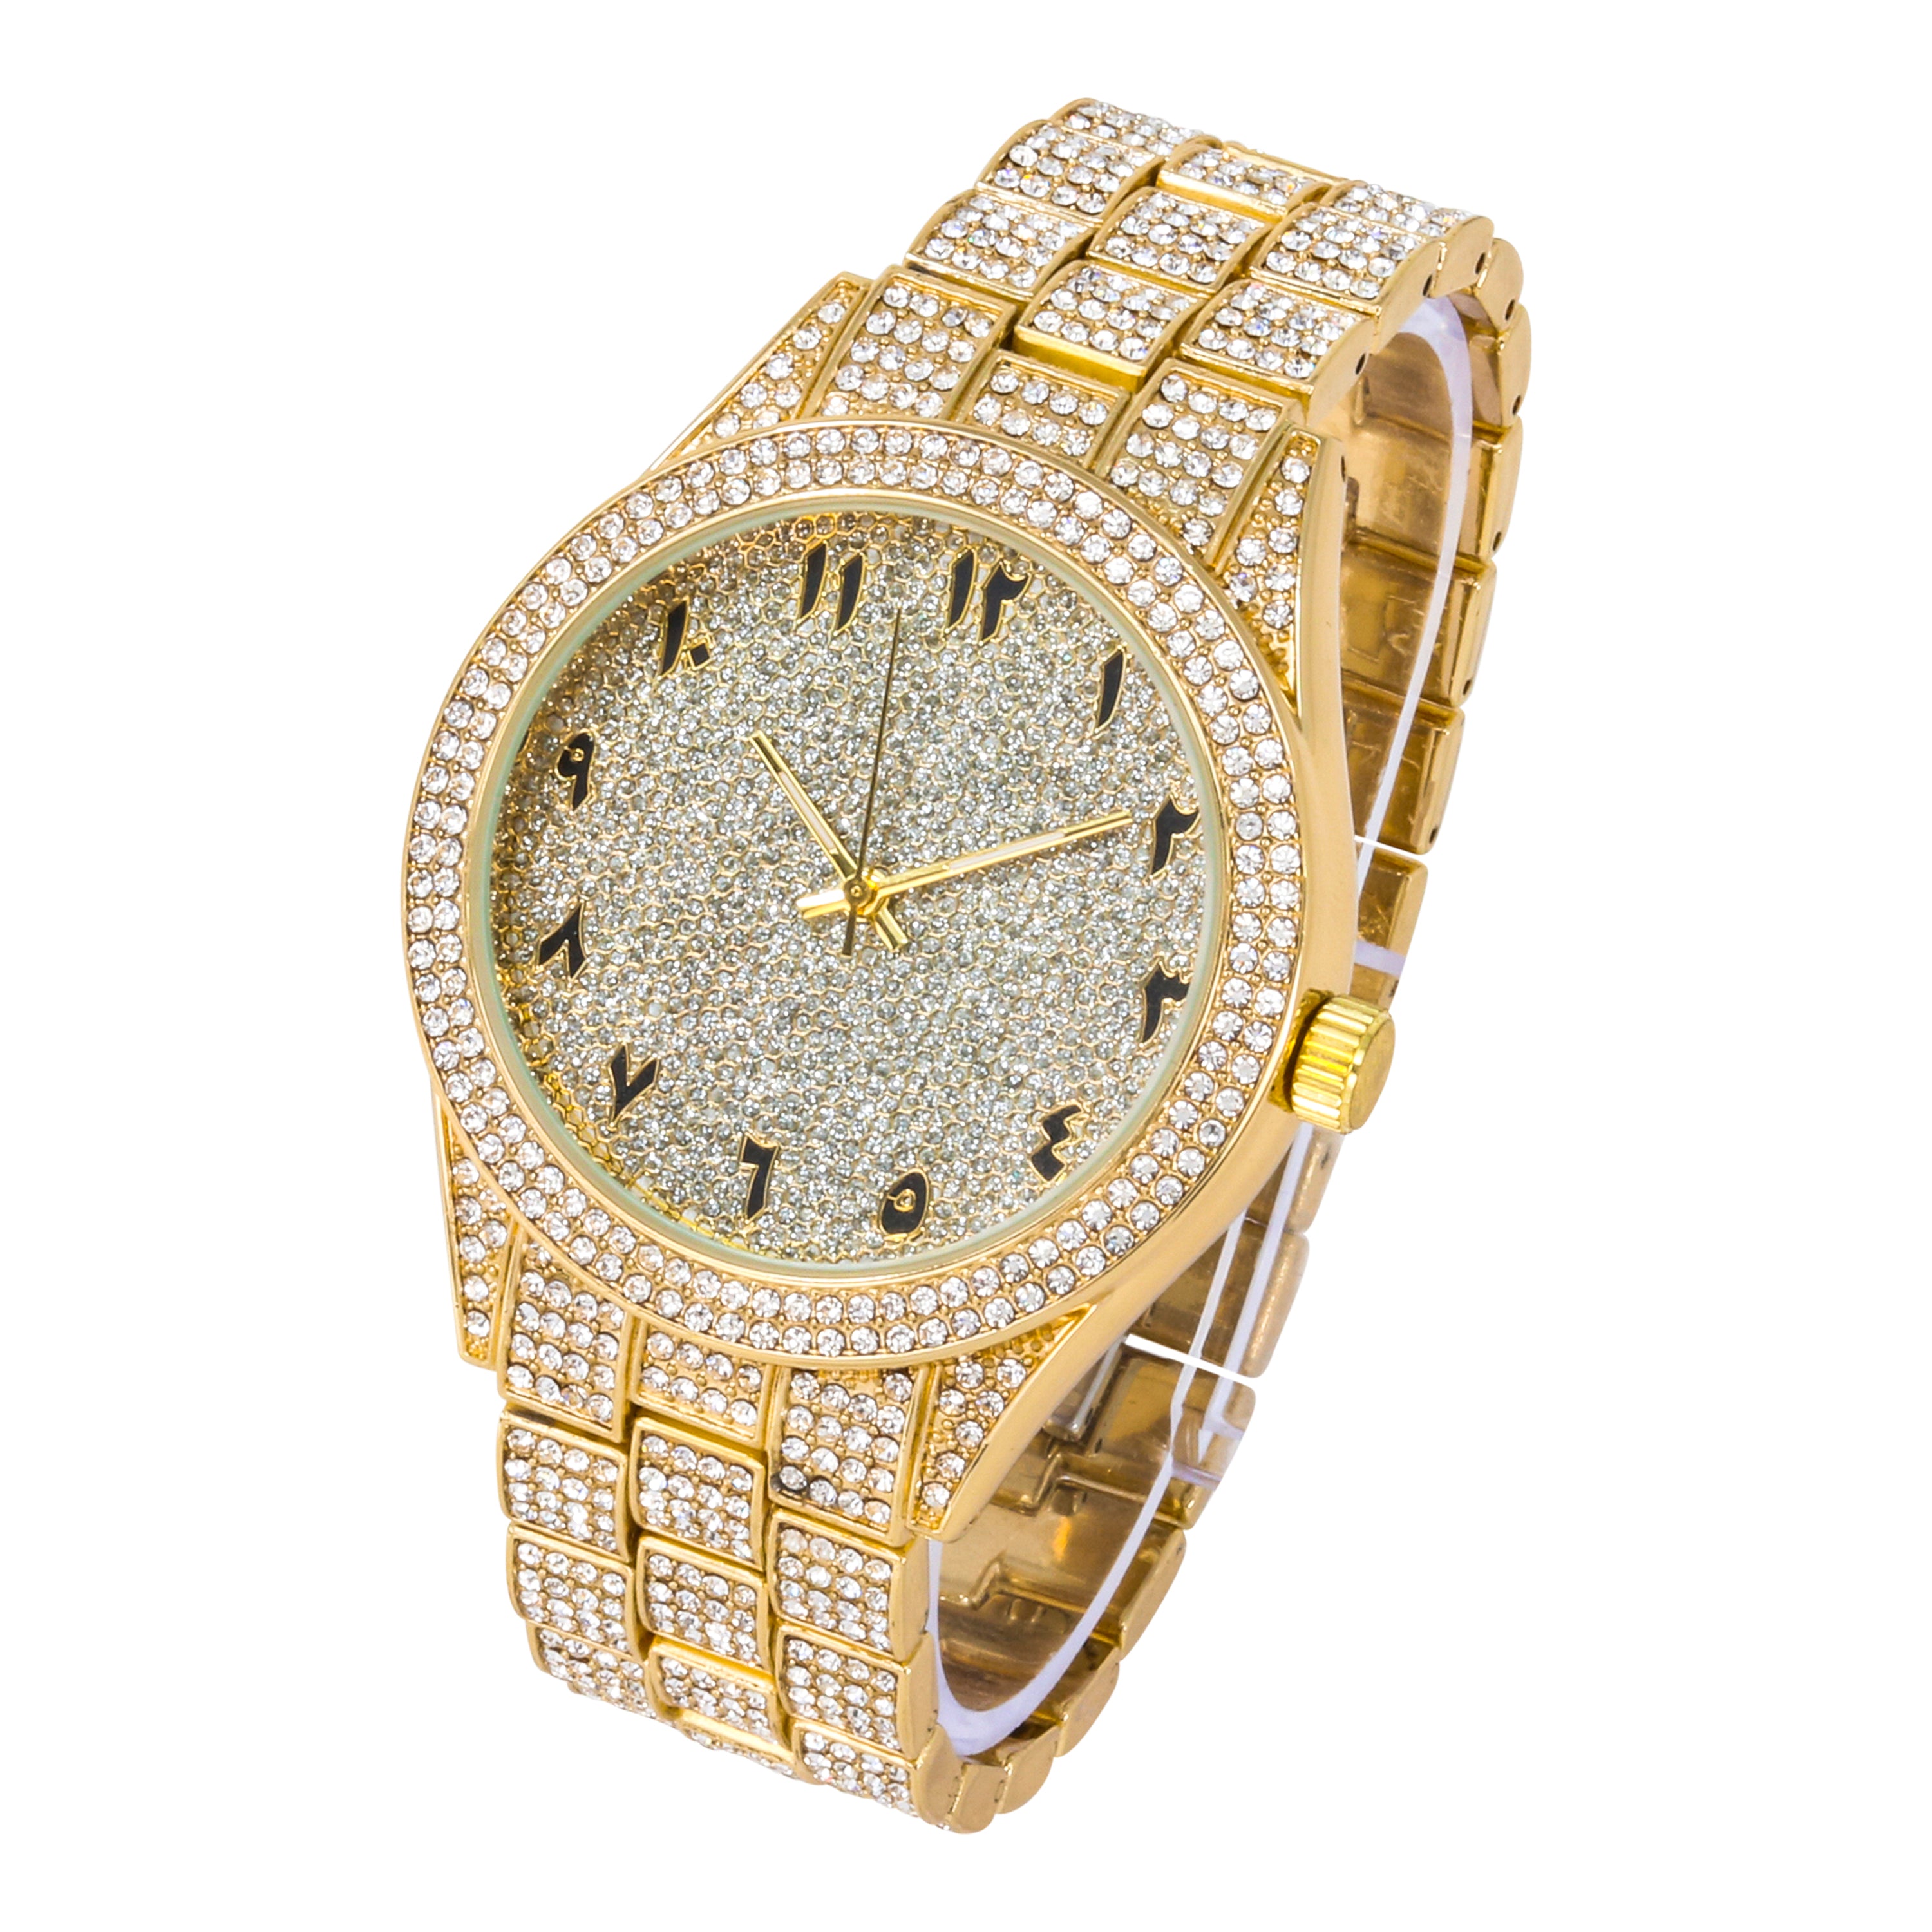 Men's Round Iced Out Watch 43mm Gold - Arab Dial